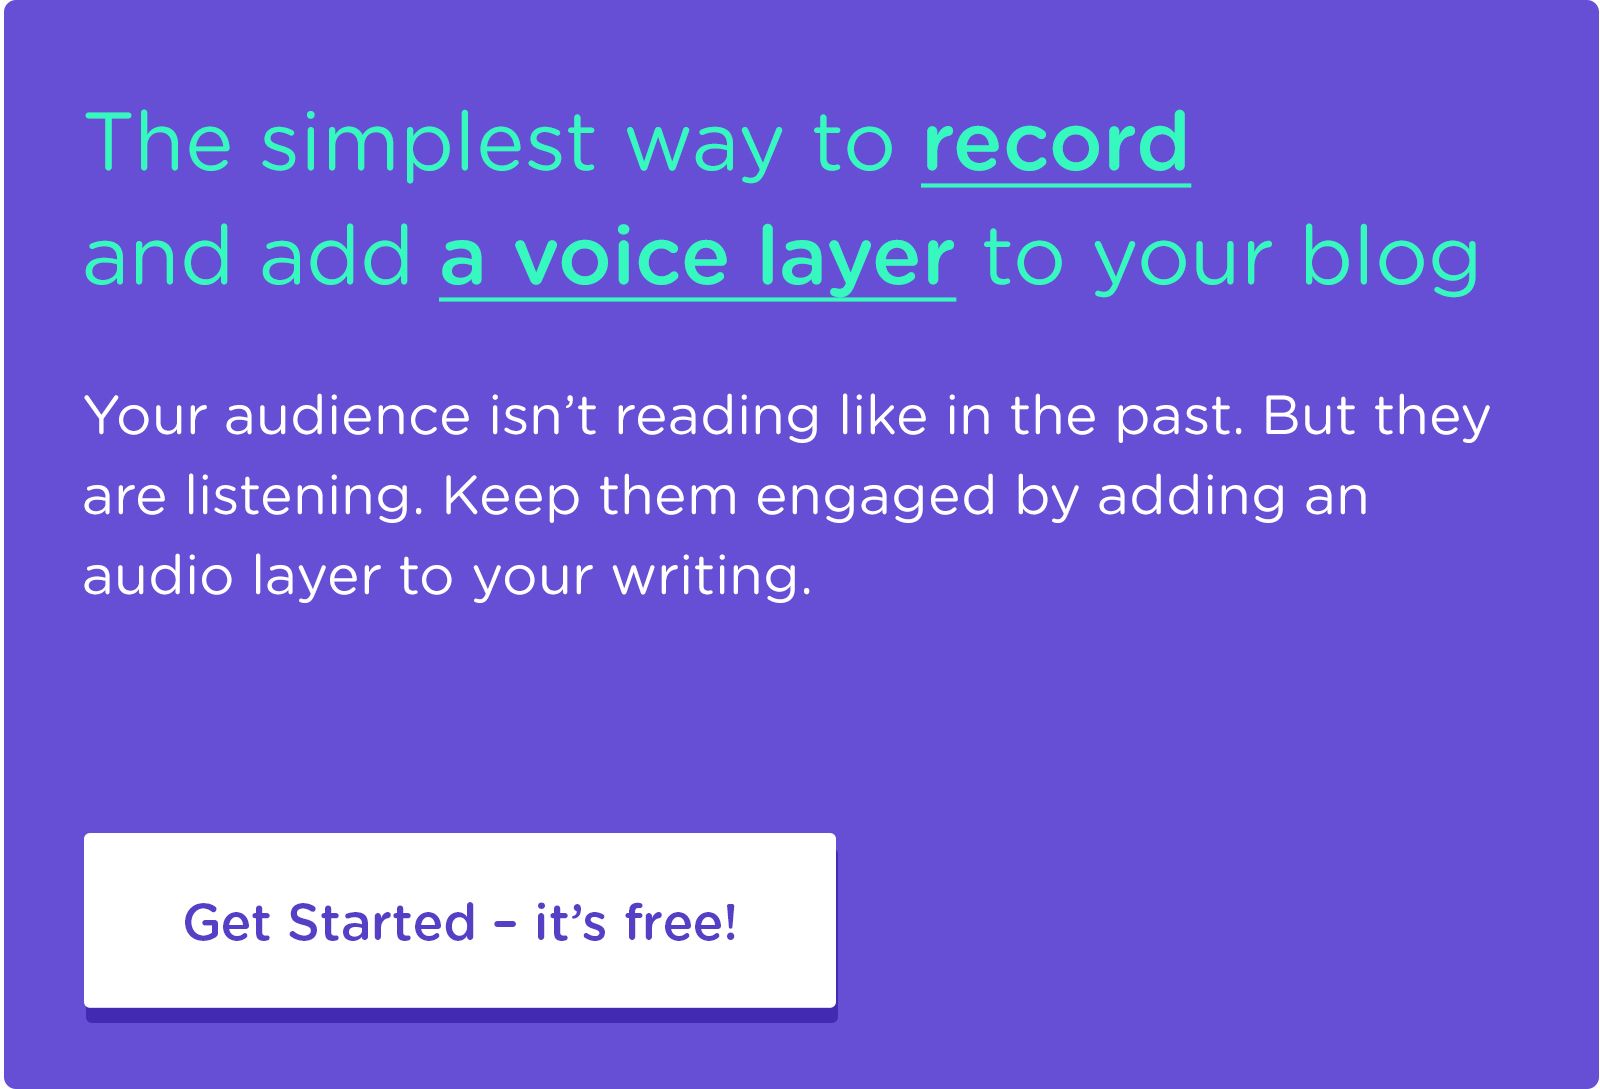 Everything You Need to Start Adding Audio to Your Blog